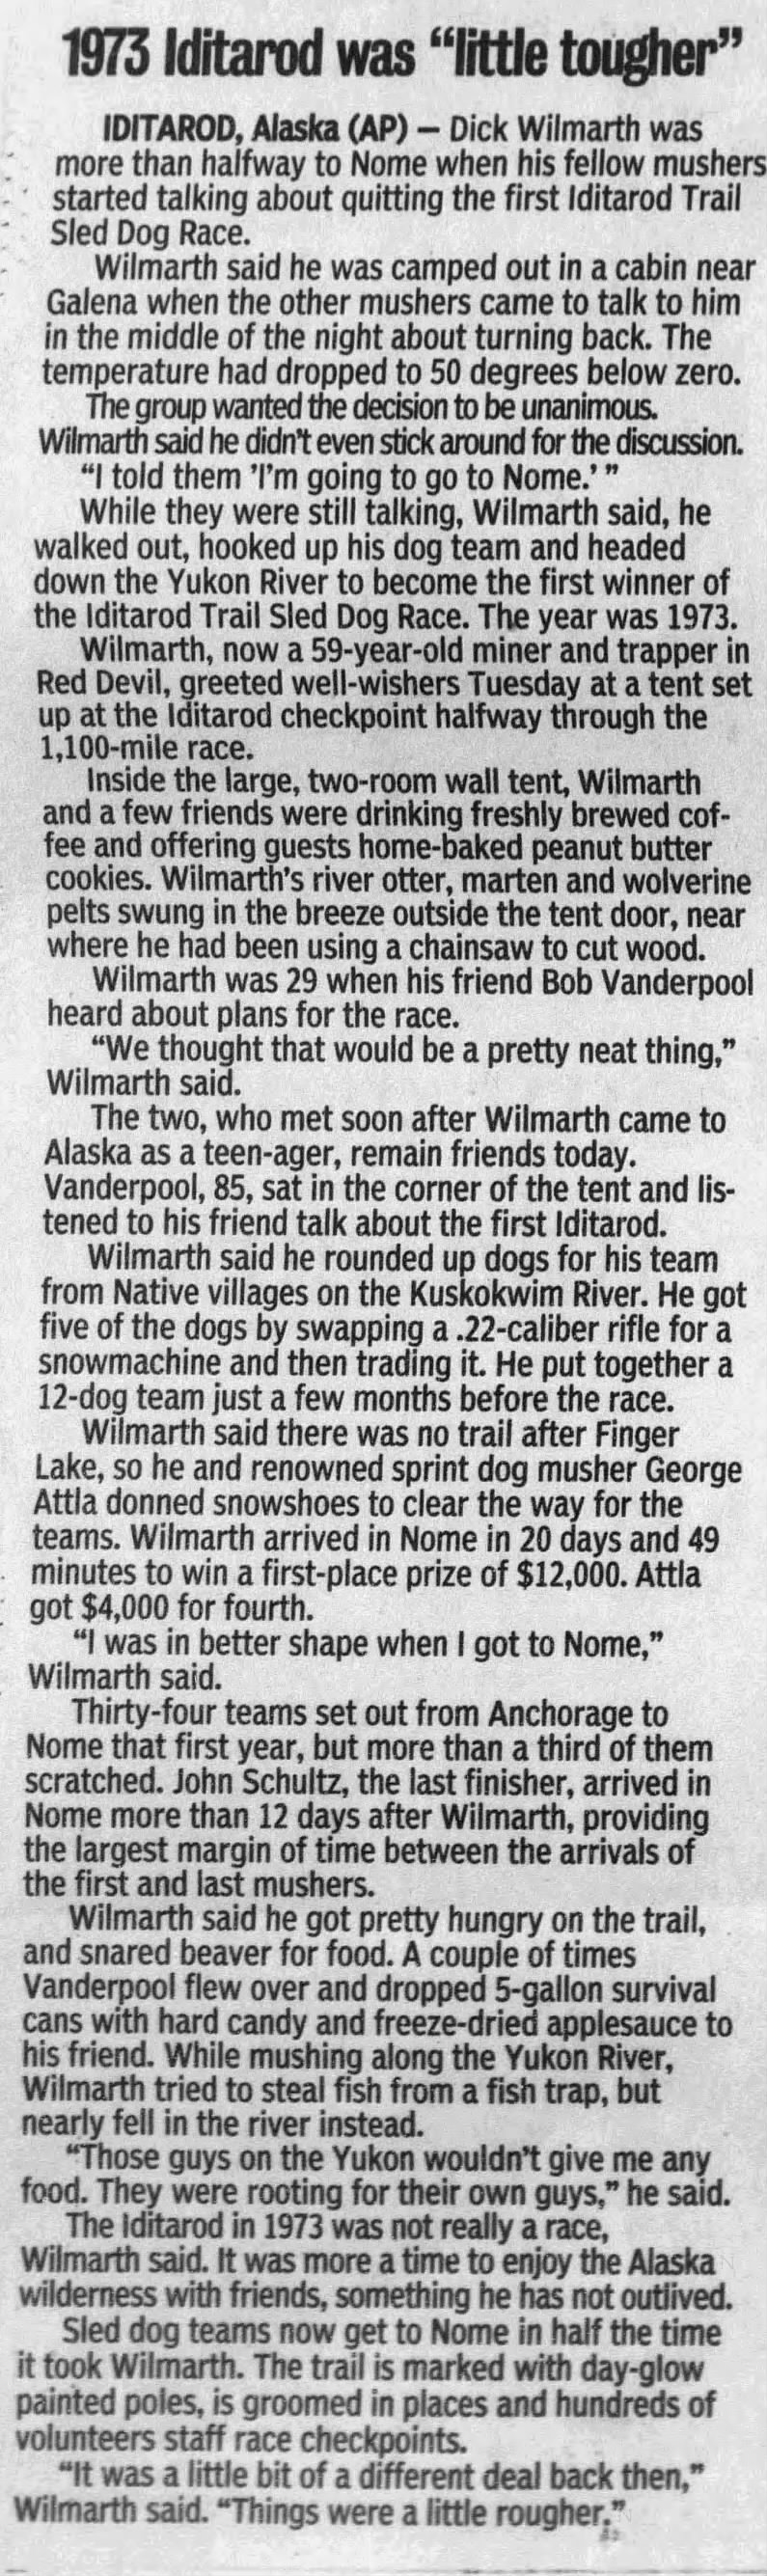 2001 interview with winner of first Iditarod